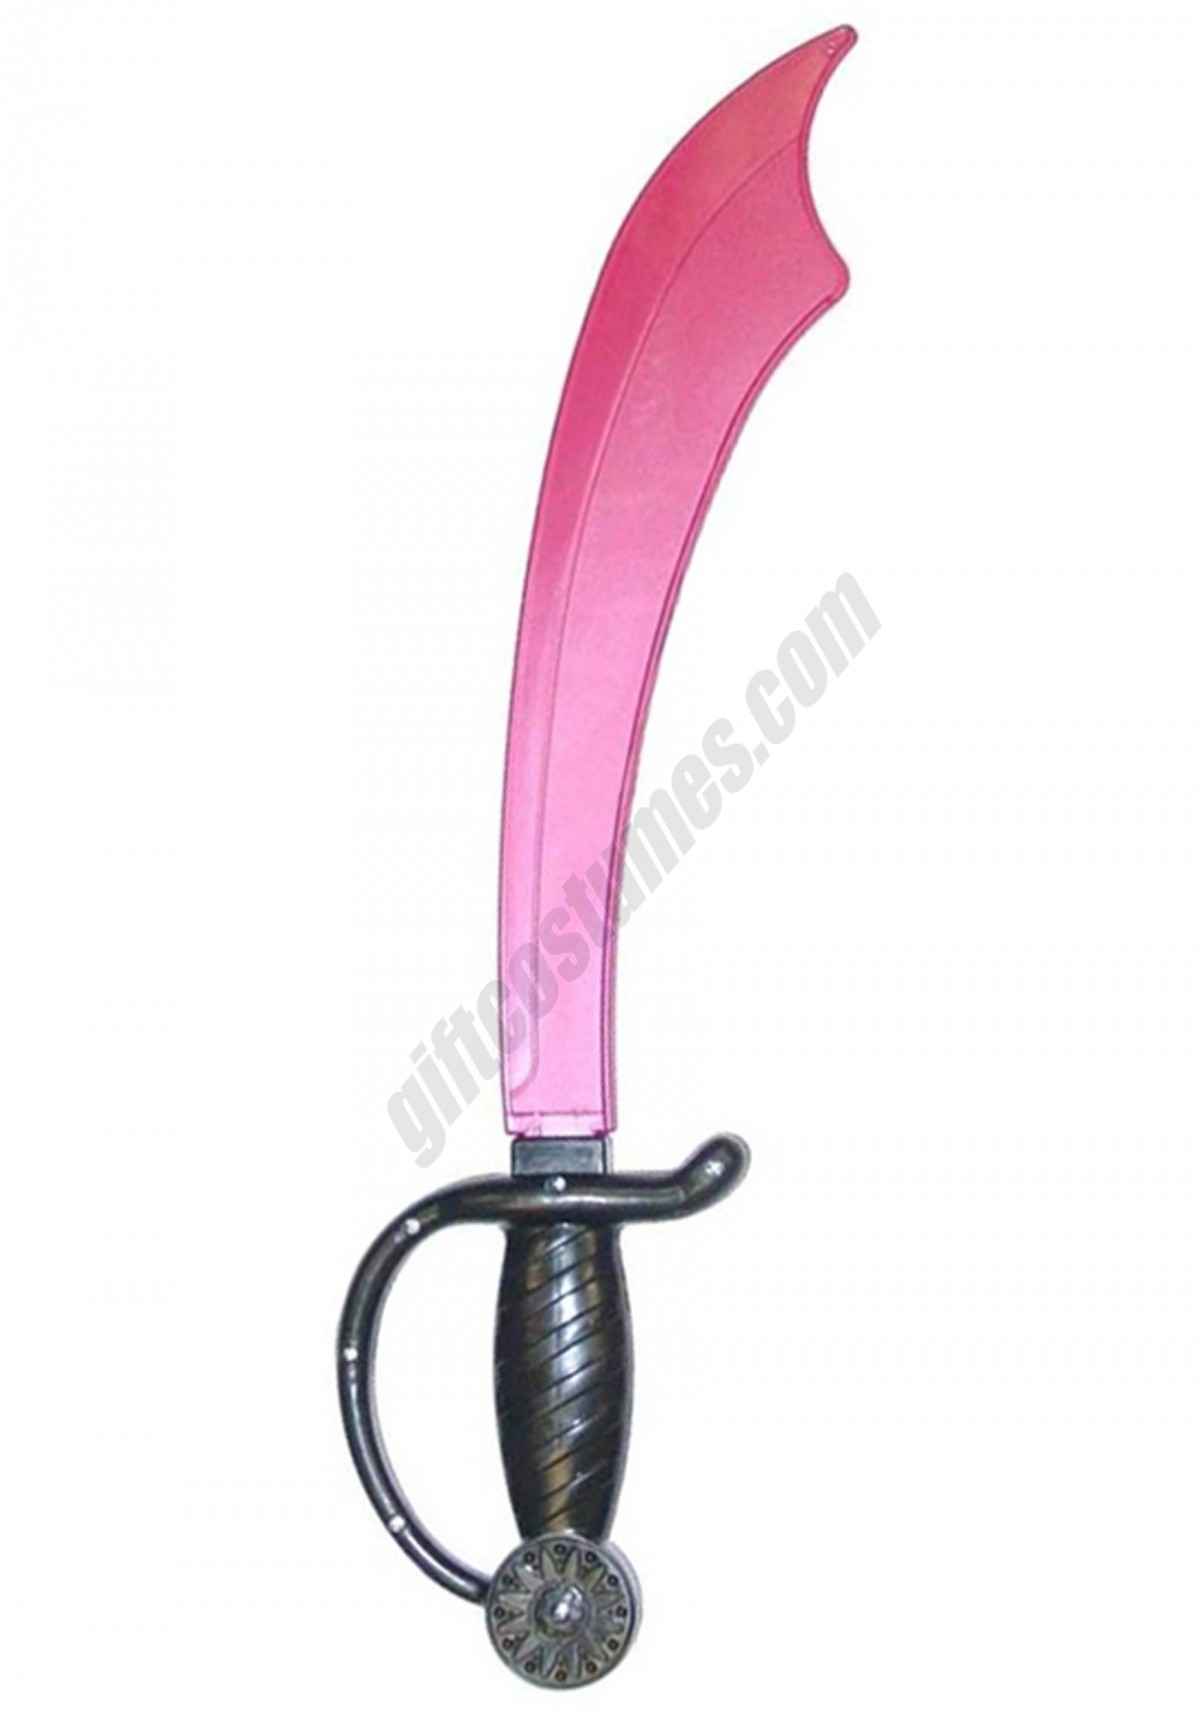 Pink Toy Pirate Sword Promotions - -0